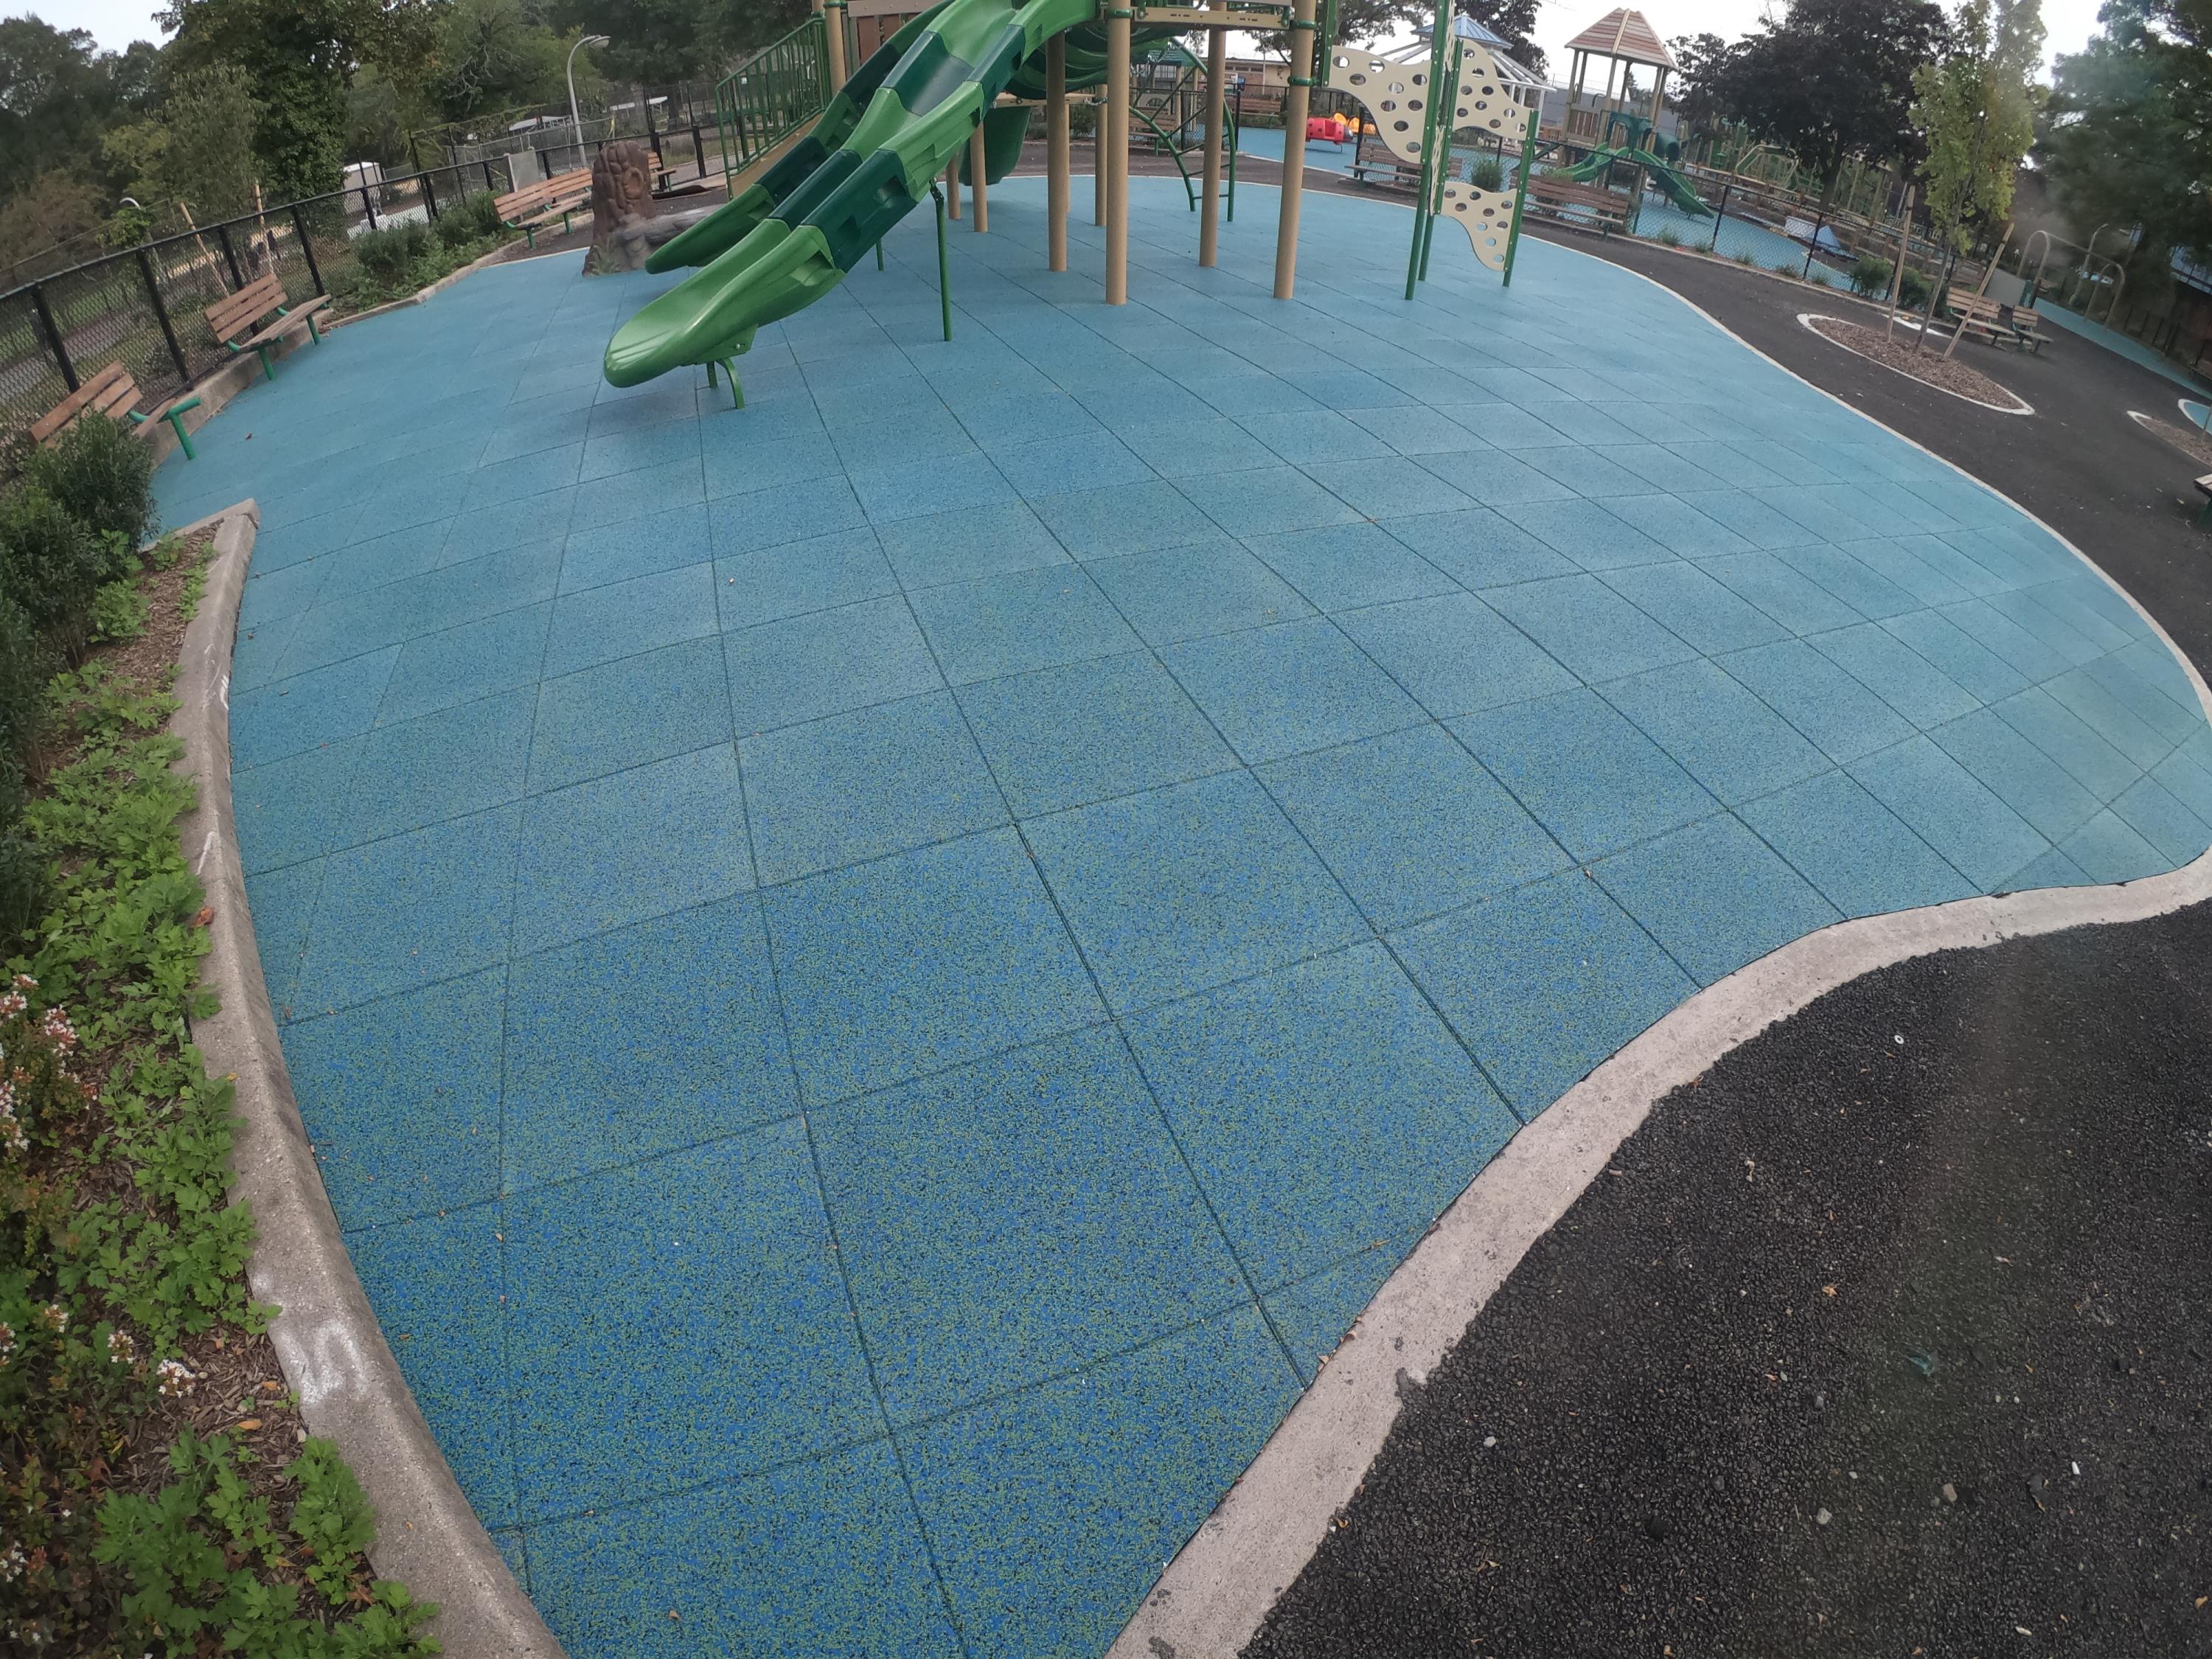 County Park Playground = Using TPV Top Tiles w50% Blue 45% Green 5% Black r